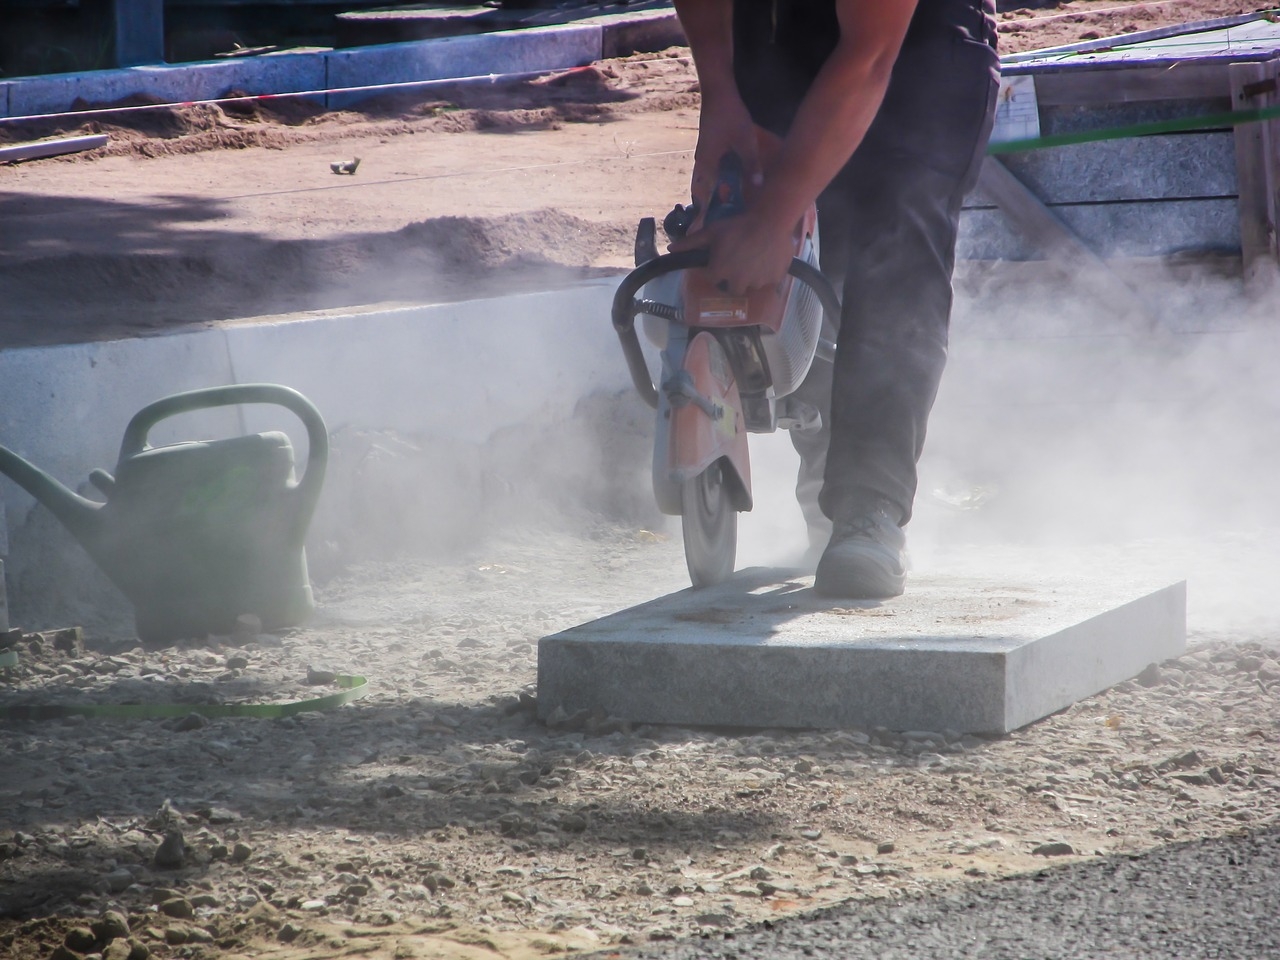 image of saw creating dust